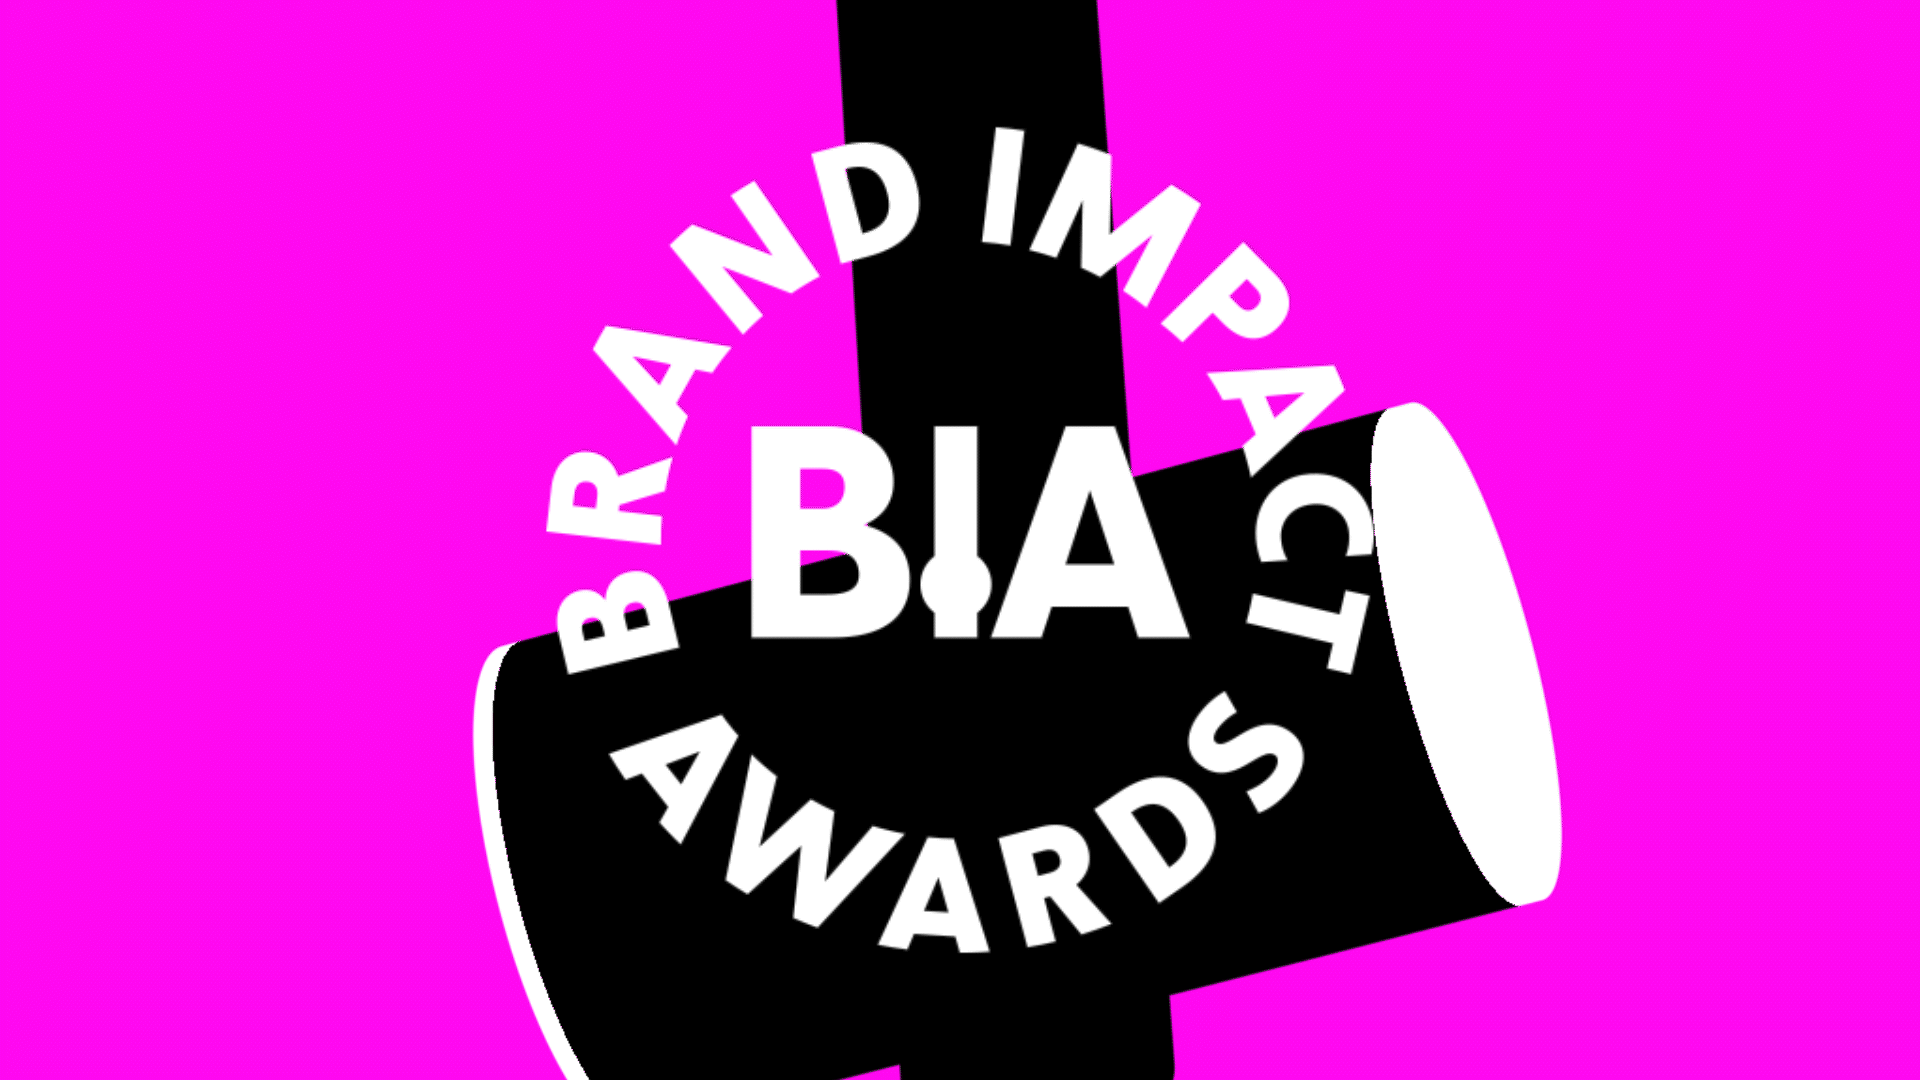 "Our strategy was to place impact at the heart": Spencer Buck on rebranding the Brand Impact Awards